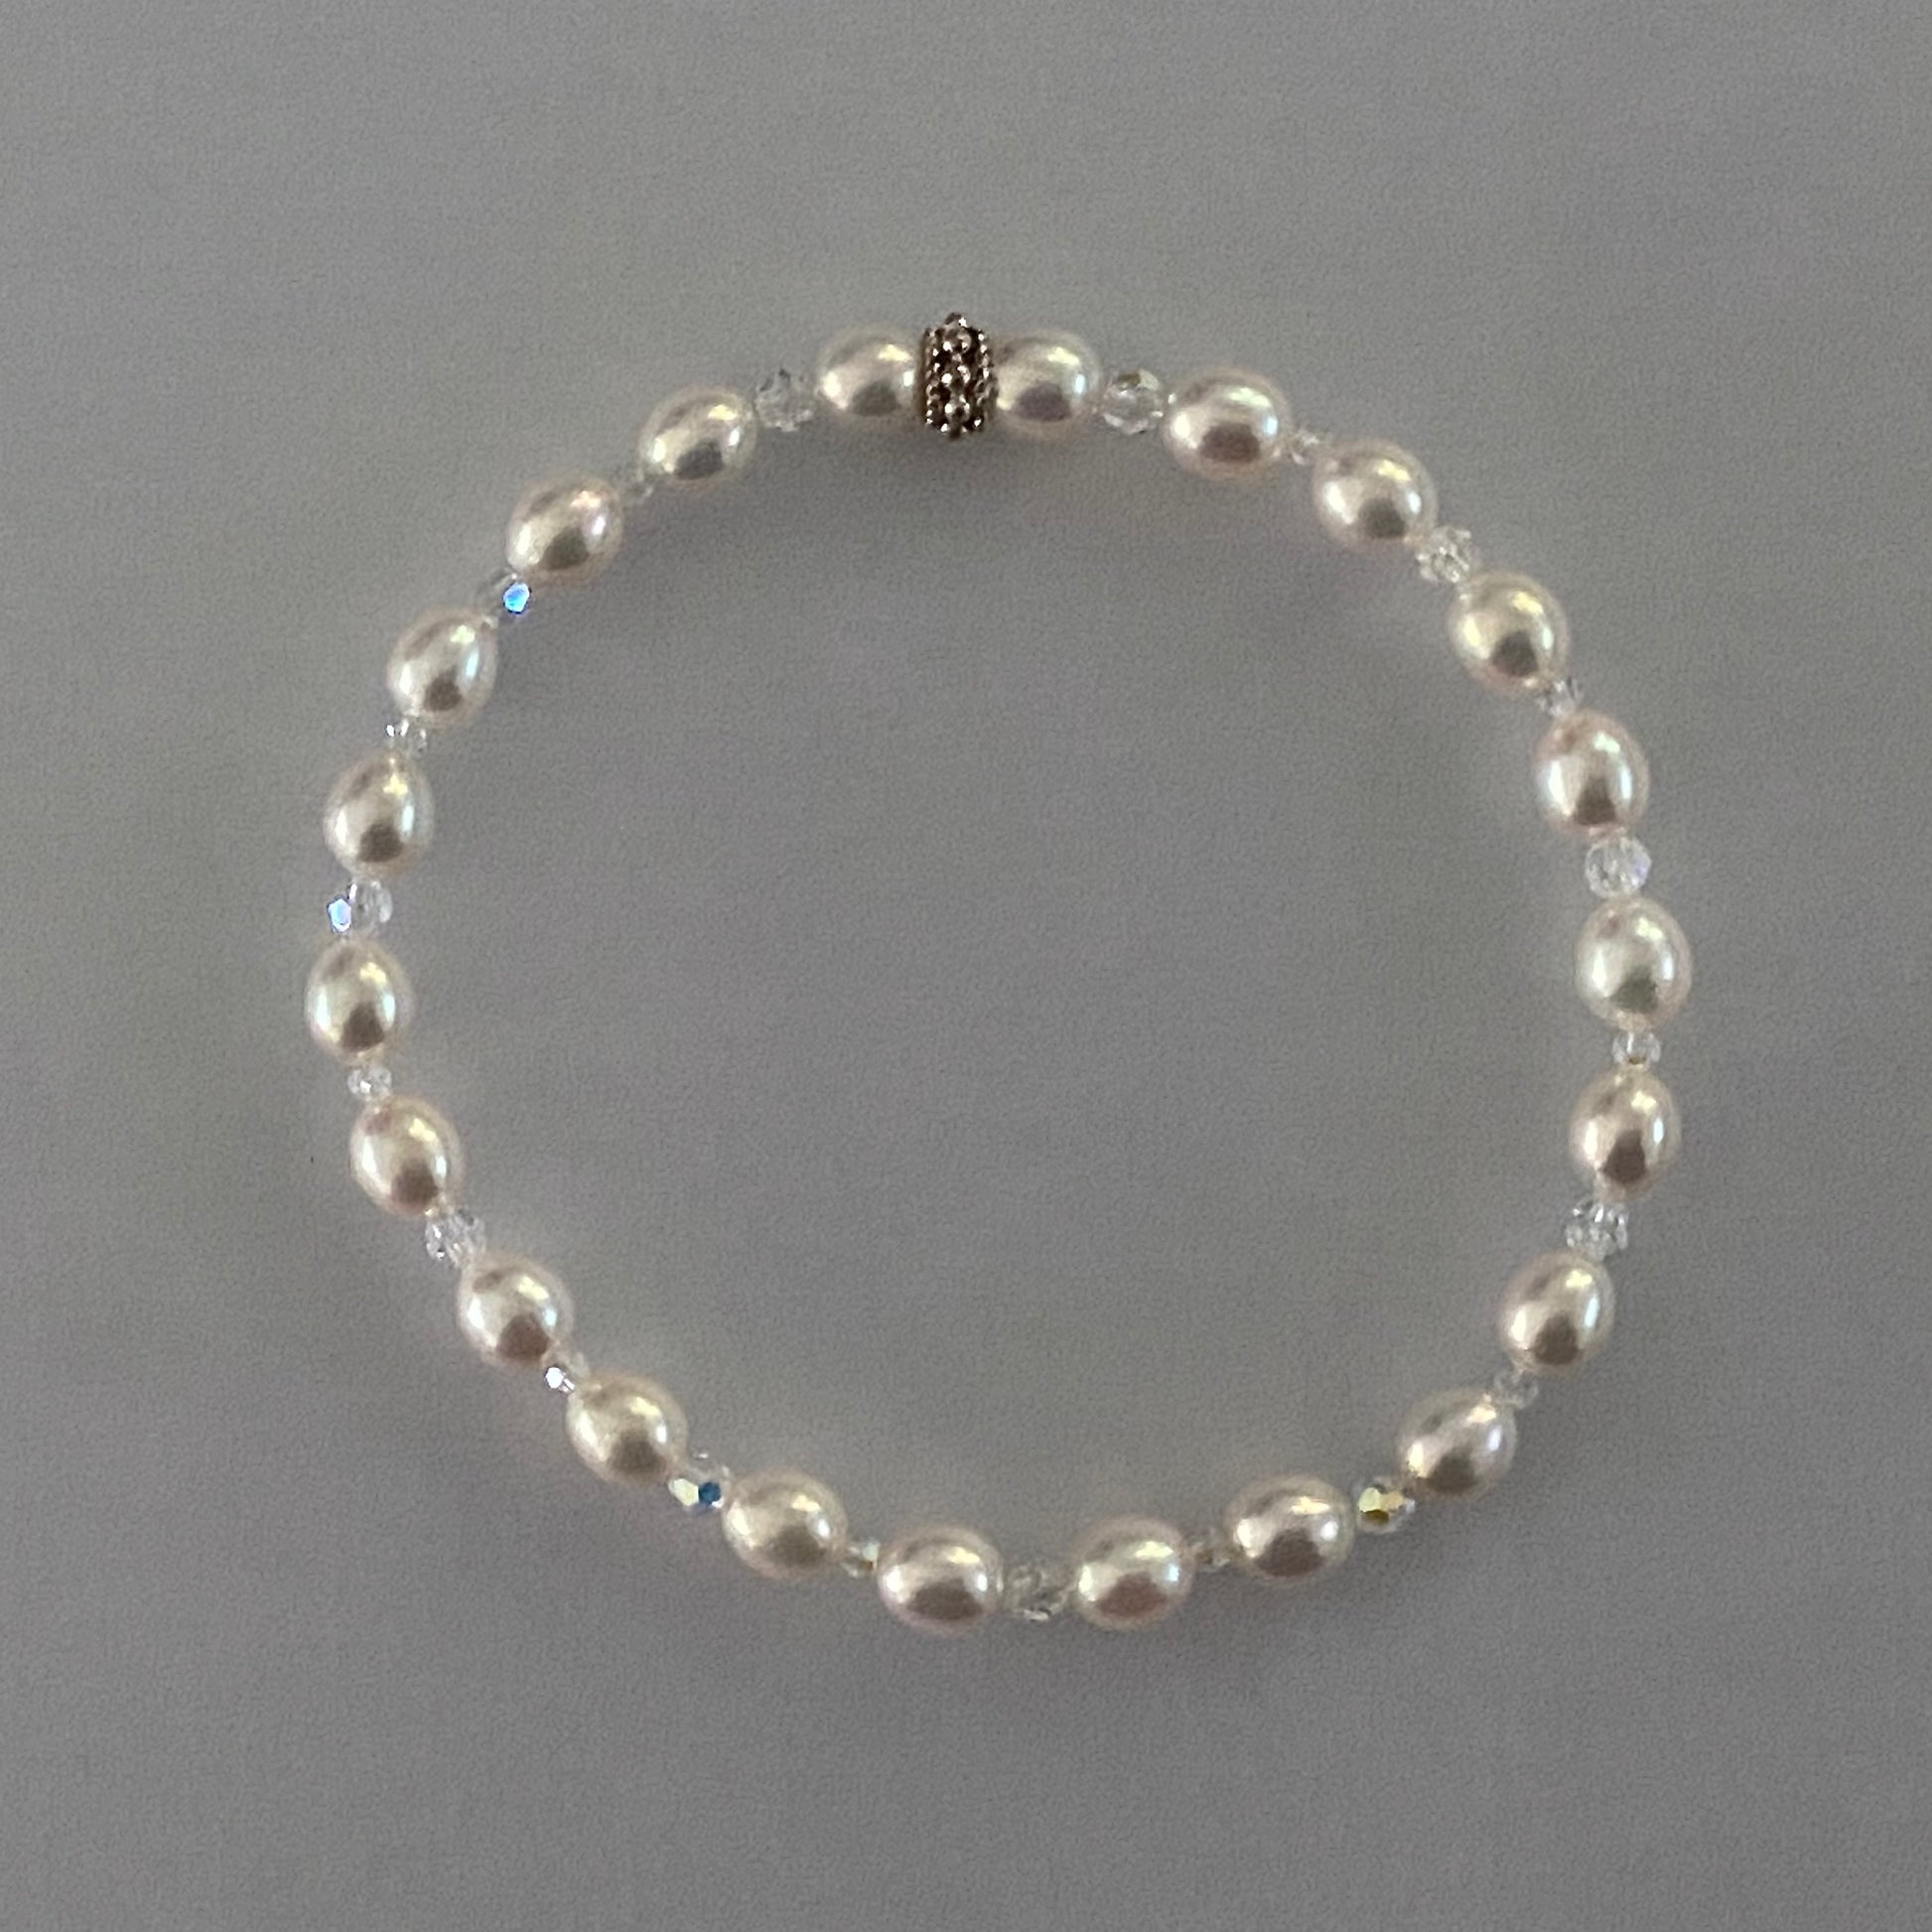 7-1/3" stretch bracelet with soft white color uniform oval shaped cultured freshwater pearls & Swarovski crystal beads / Arpaia Jewelry